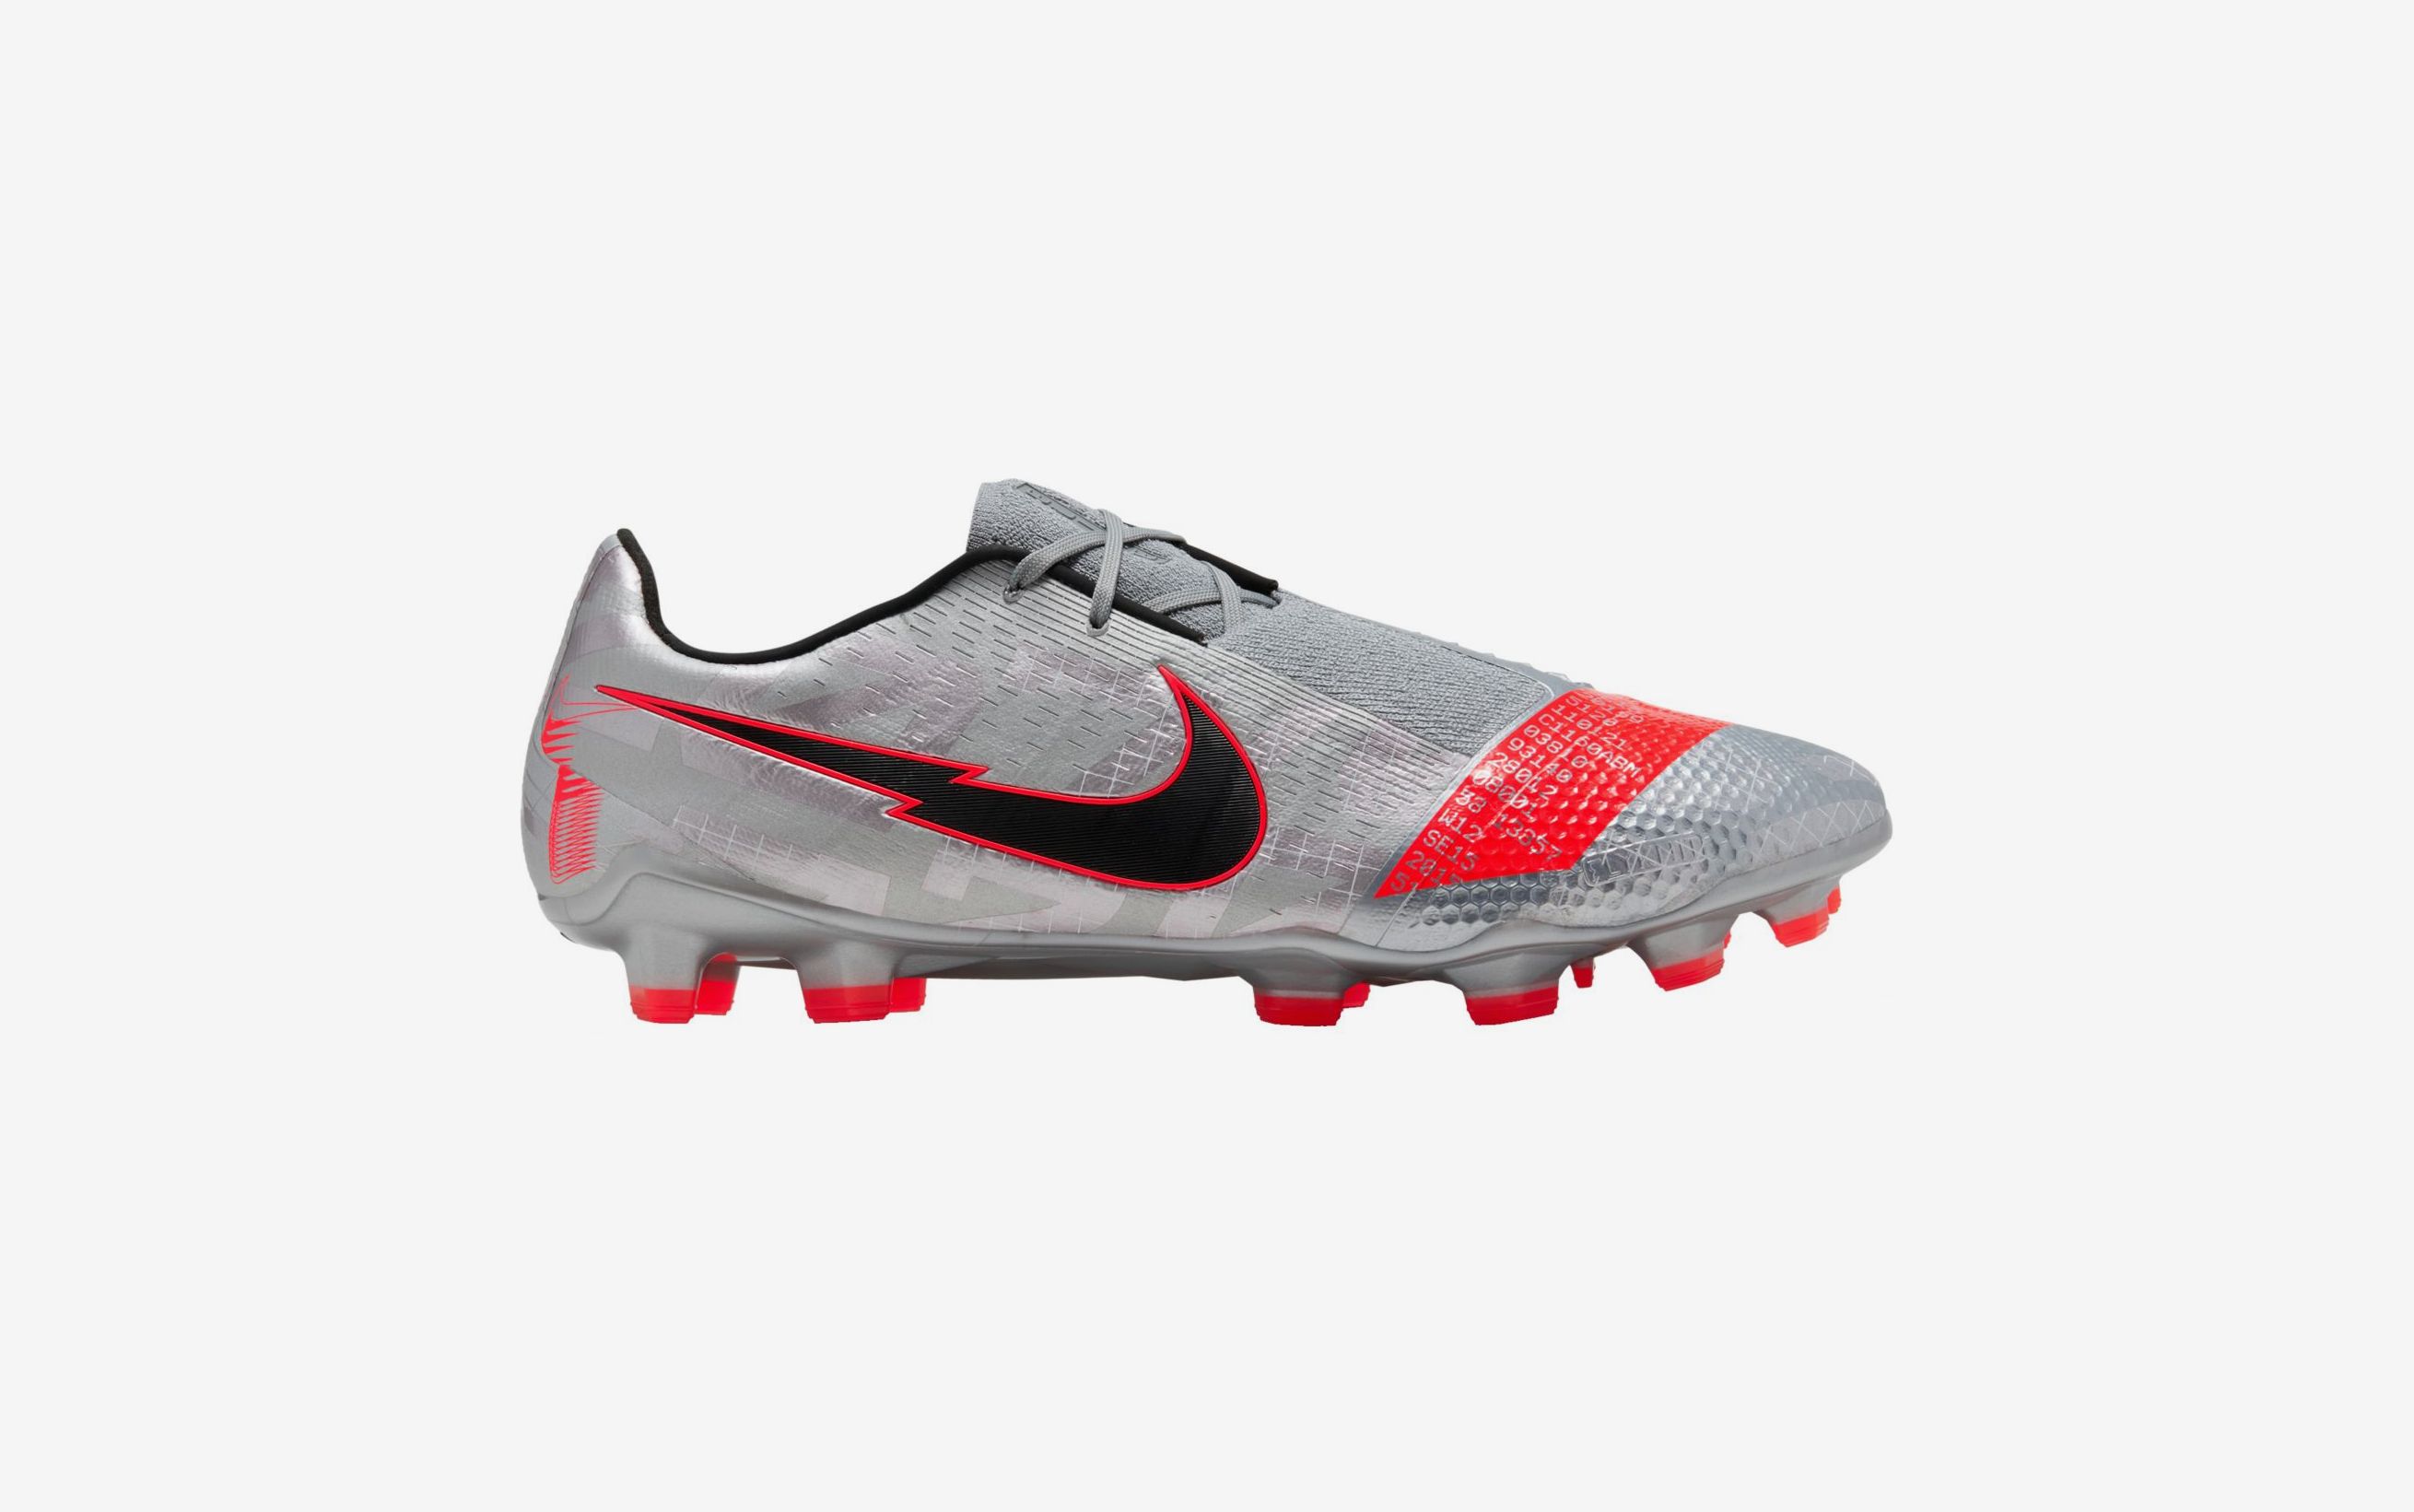 Smart Buying Guide: 10 Best Soccer Cleats in 2020